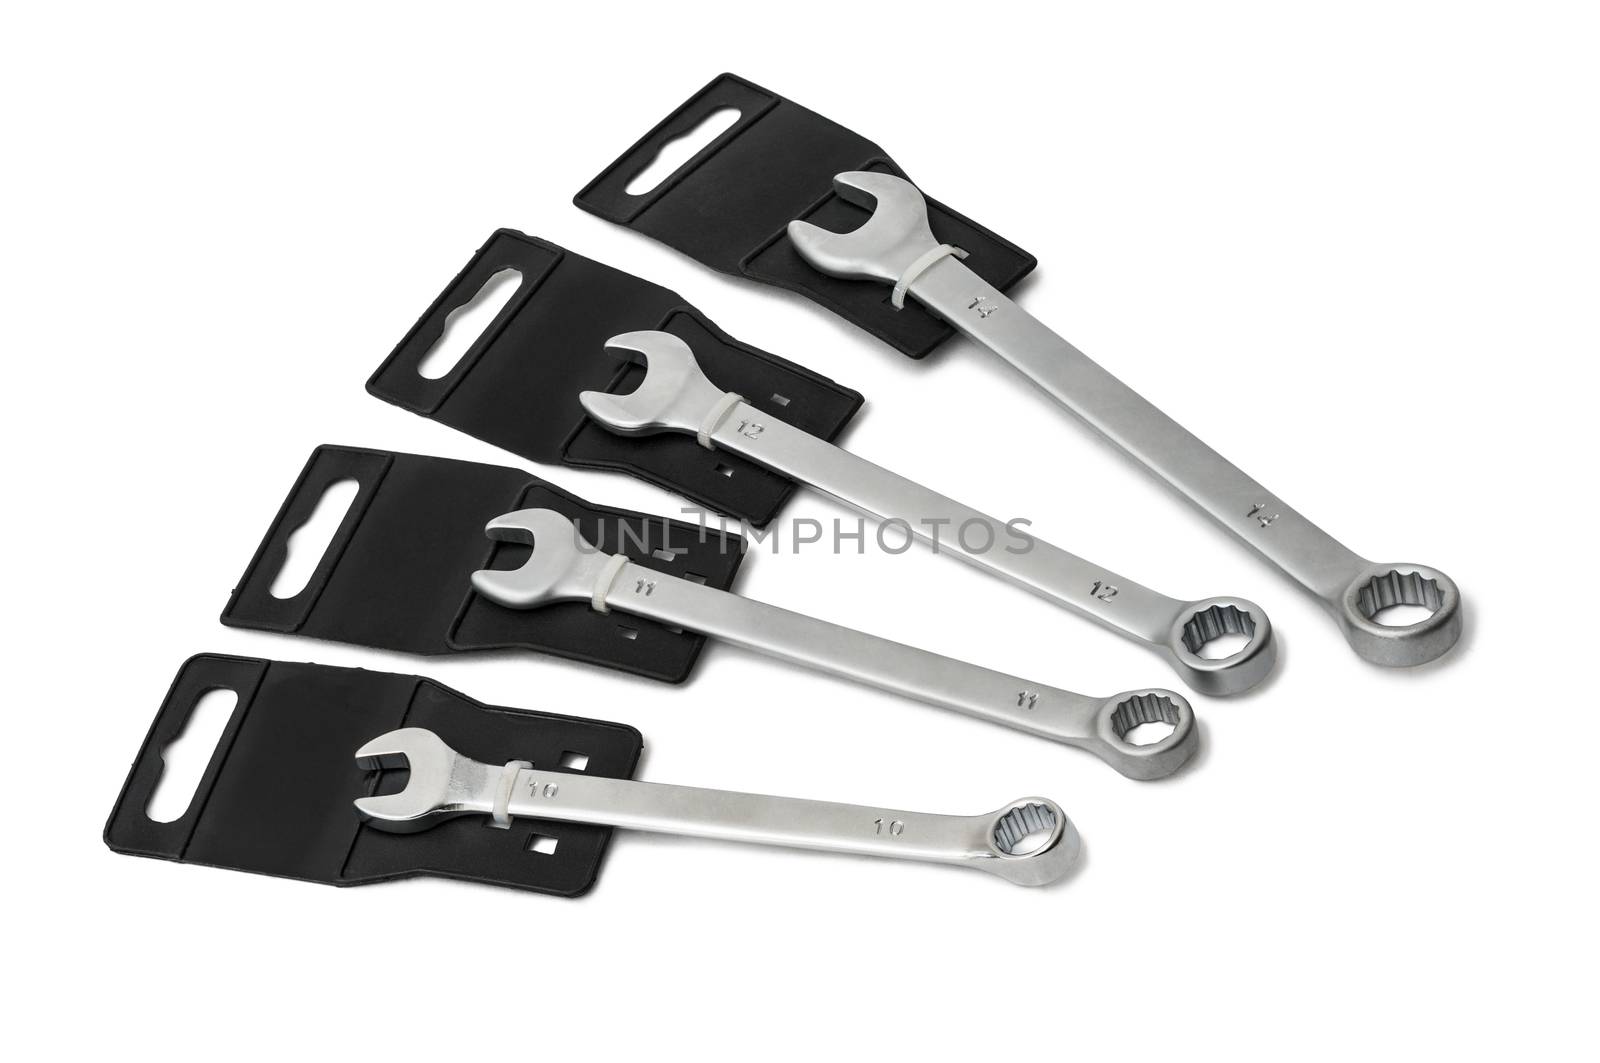 new wrenches it is isolated on a white background